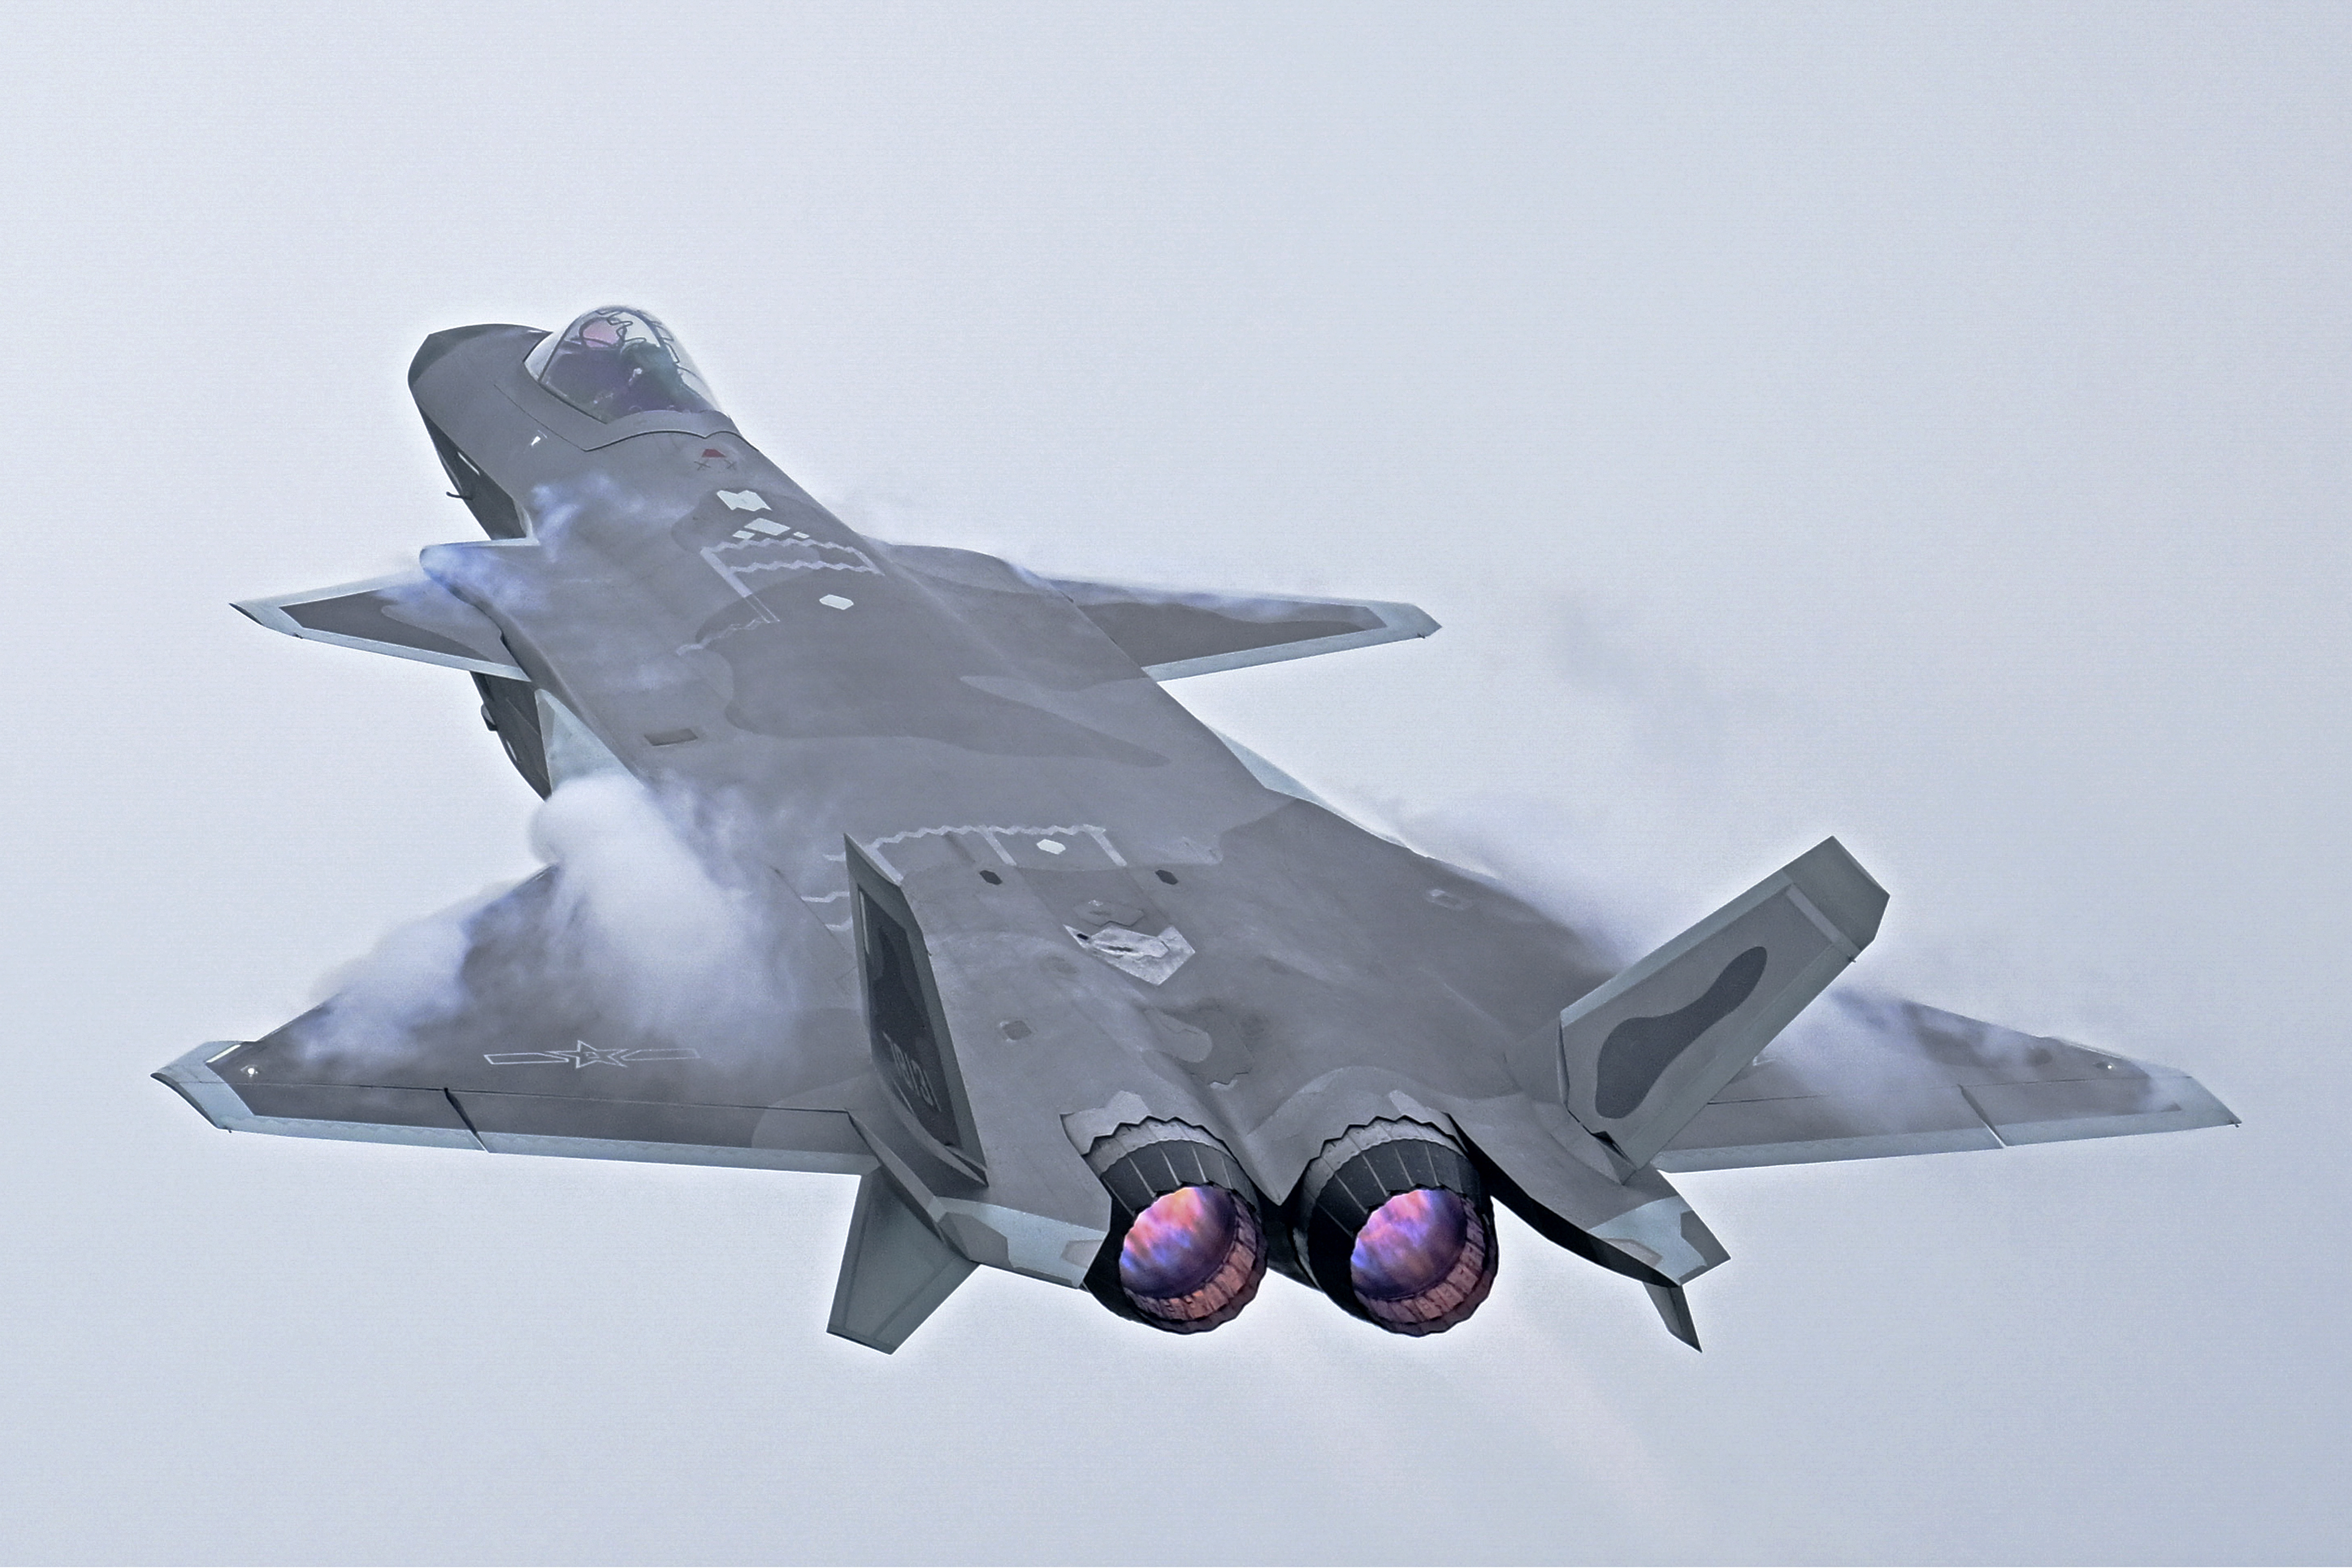 China is improving its fifth-generation J-20 Mighty Dragon fighter jet to surpass the US F-22 Raptor-2